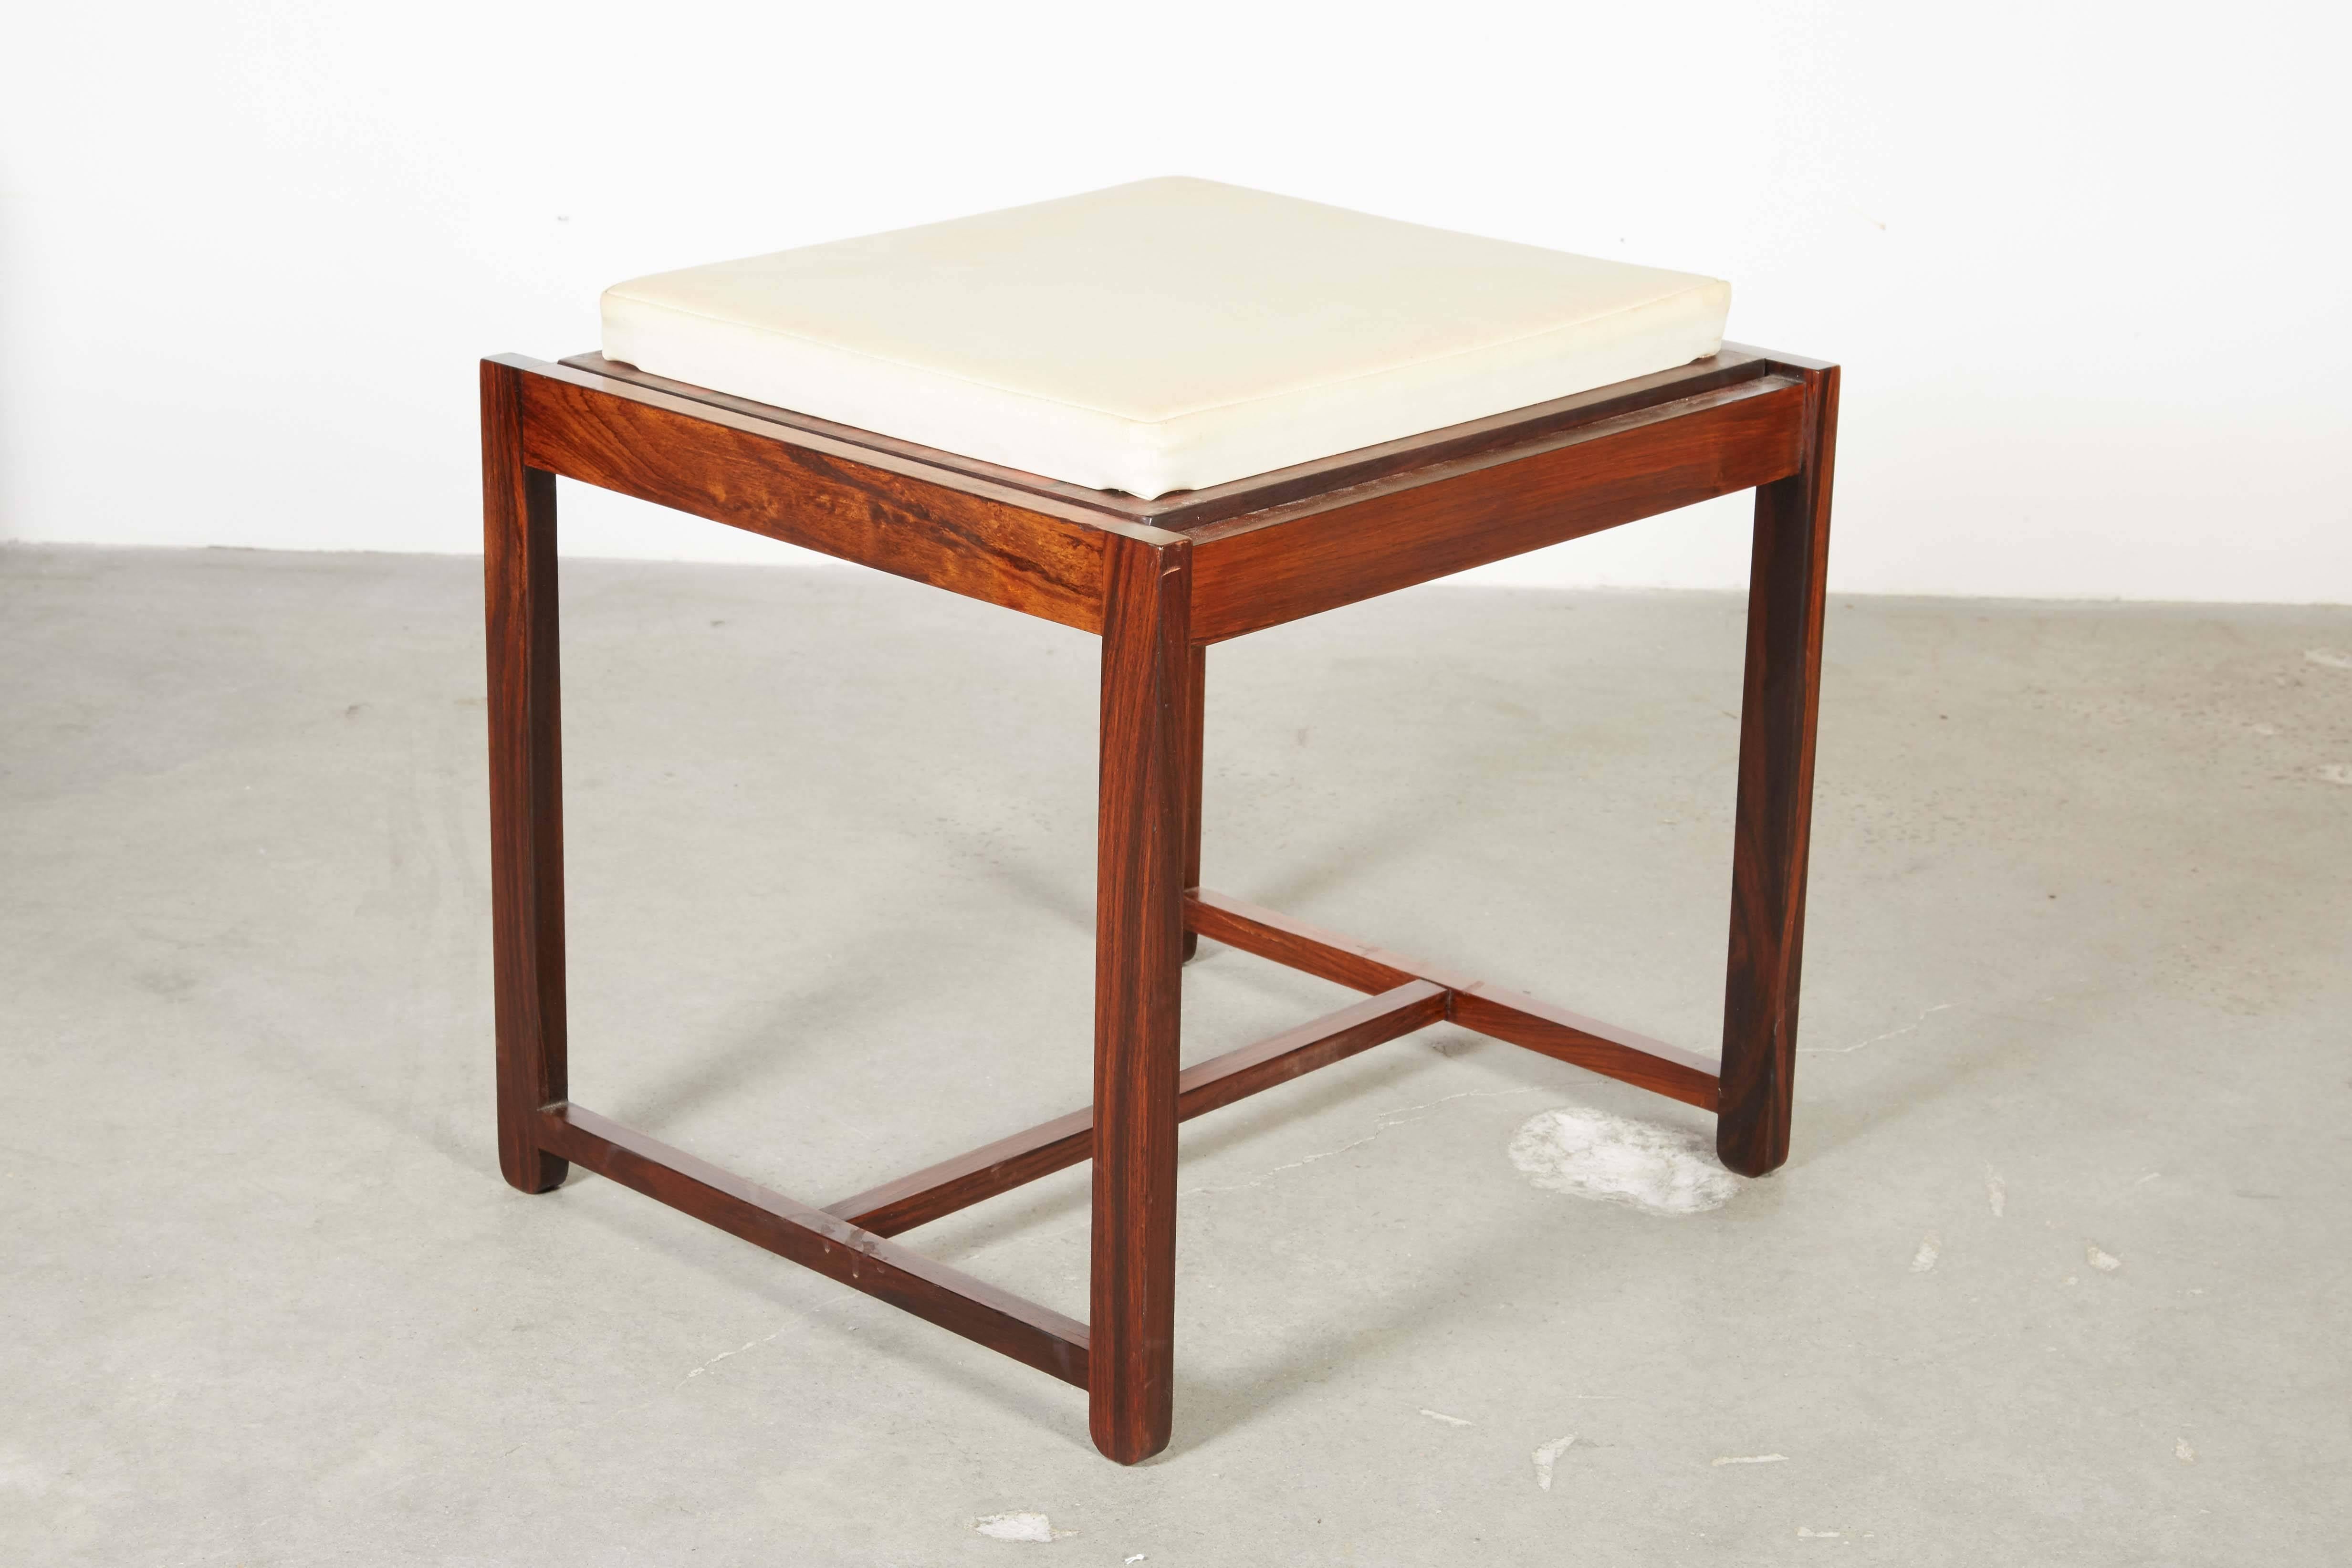 Rosewood 1960s Reversible Ottoman / End Table

This mid century side table is in excellent condition. The multi-use of this piece is what makes it. When you come home flip the side table and put your feet up. Ready for pick up, delivery, or shipping